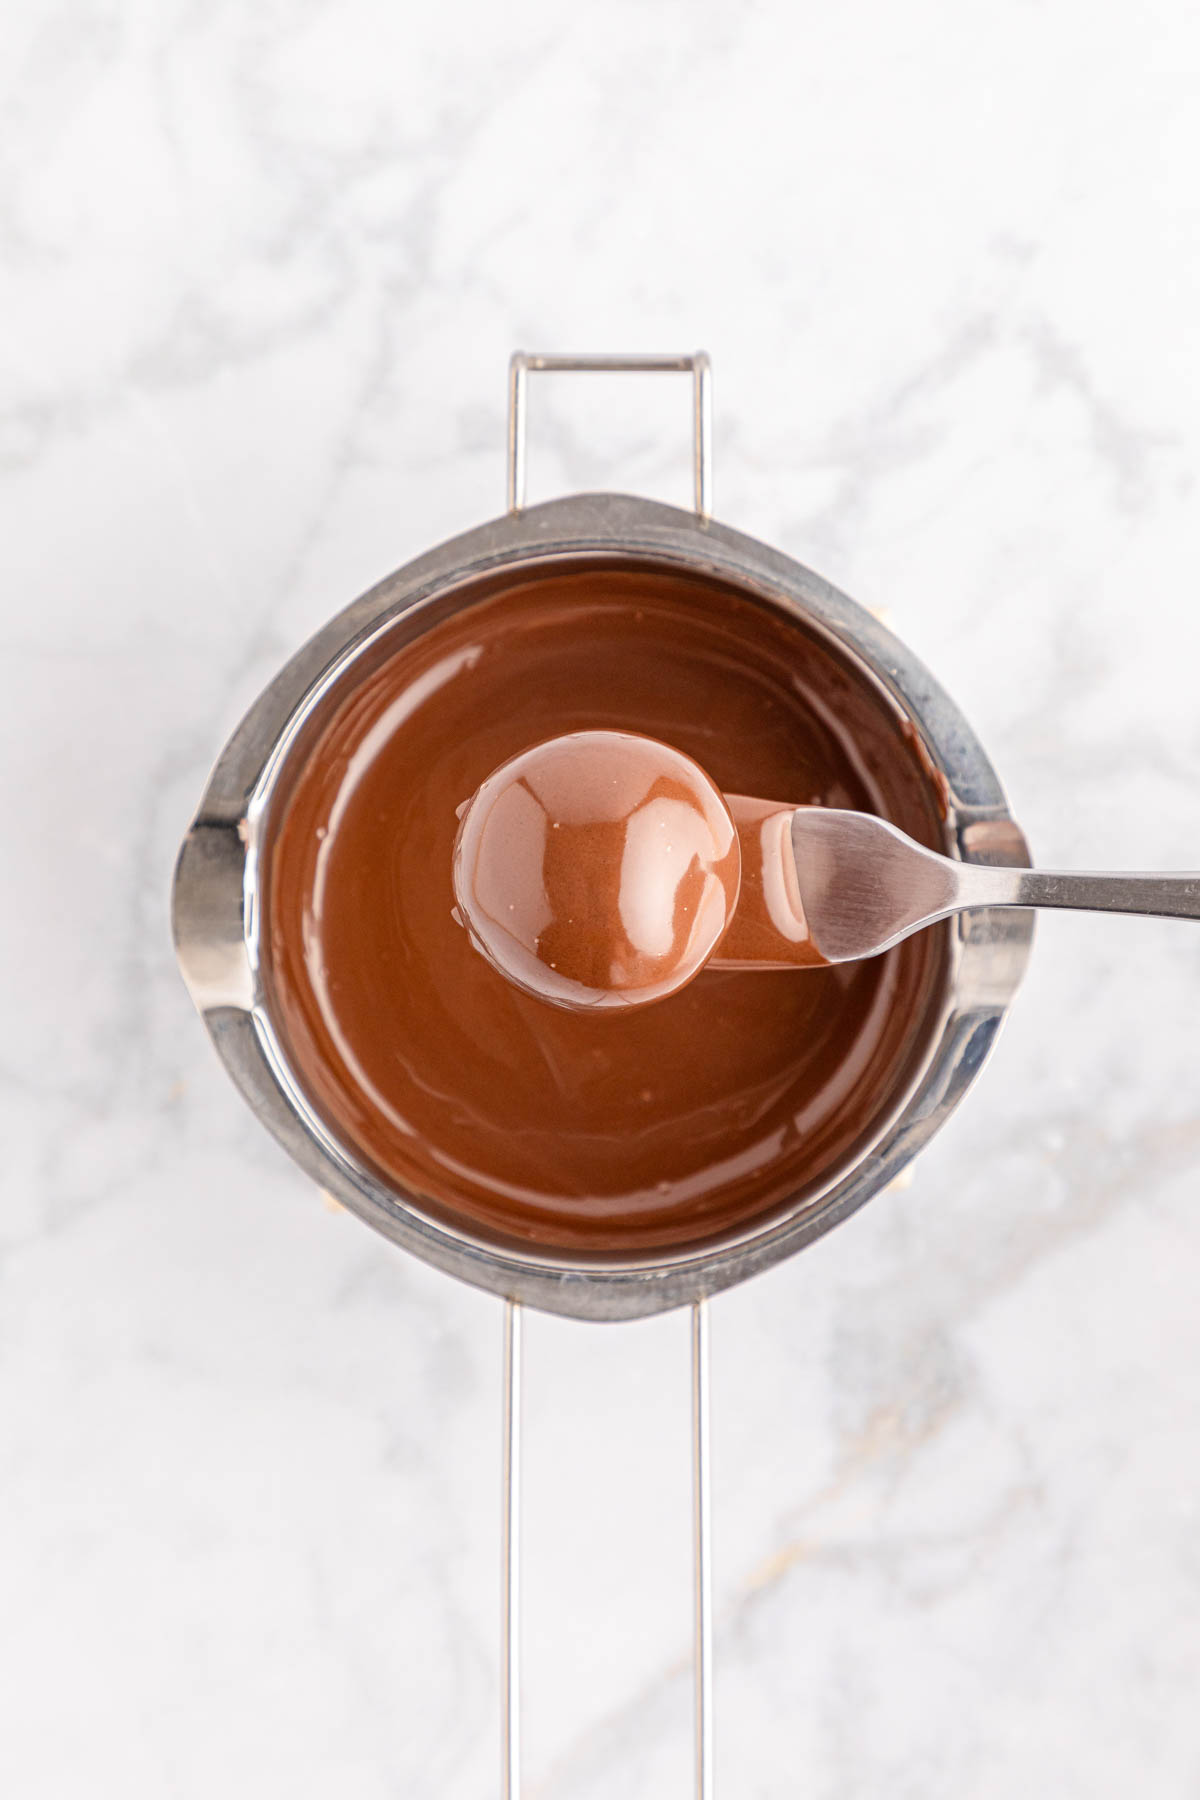 Chocolate sauce in a metal bowl with a chocolate ball on fork